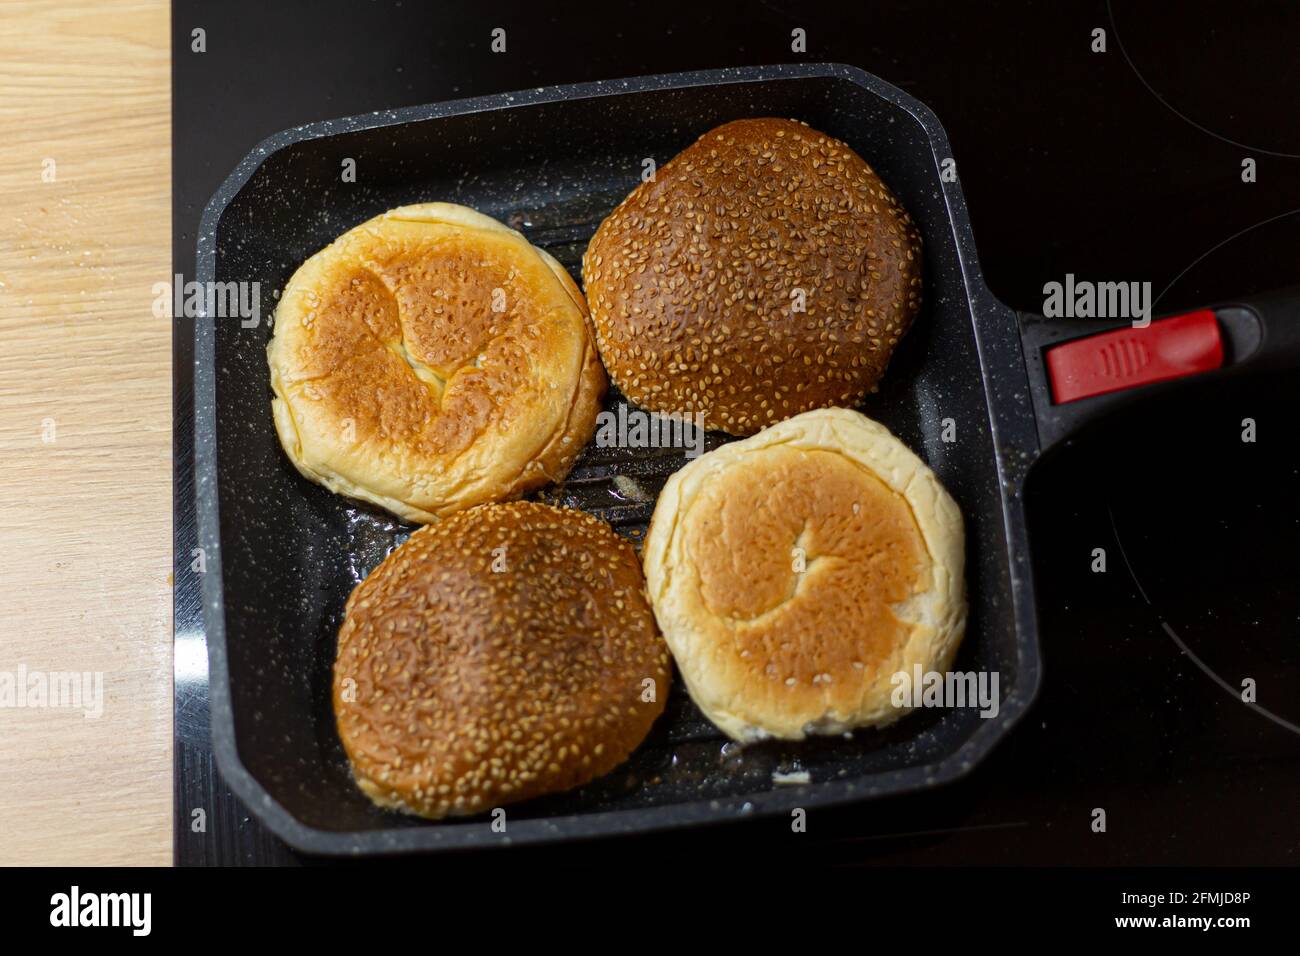 https://c8.alamy.com/comp/2FMJD8P/burger-bread-with-sesame-is-heating-on-a-grill-pan-process-of-cooking-self-made-burgers-at-home-2FMJD8P.jpg